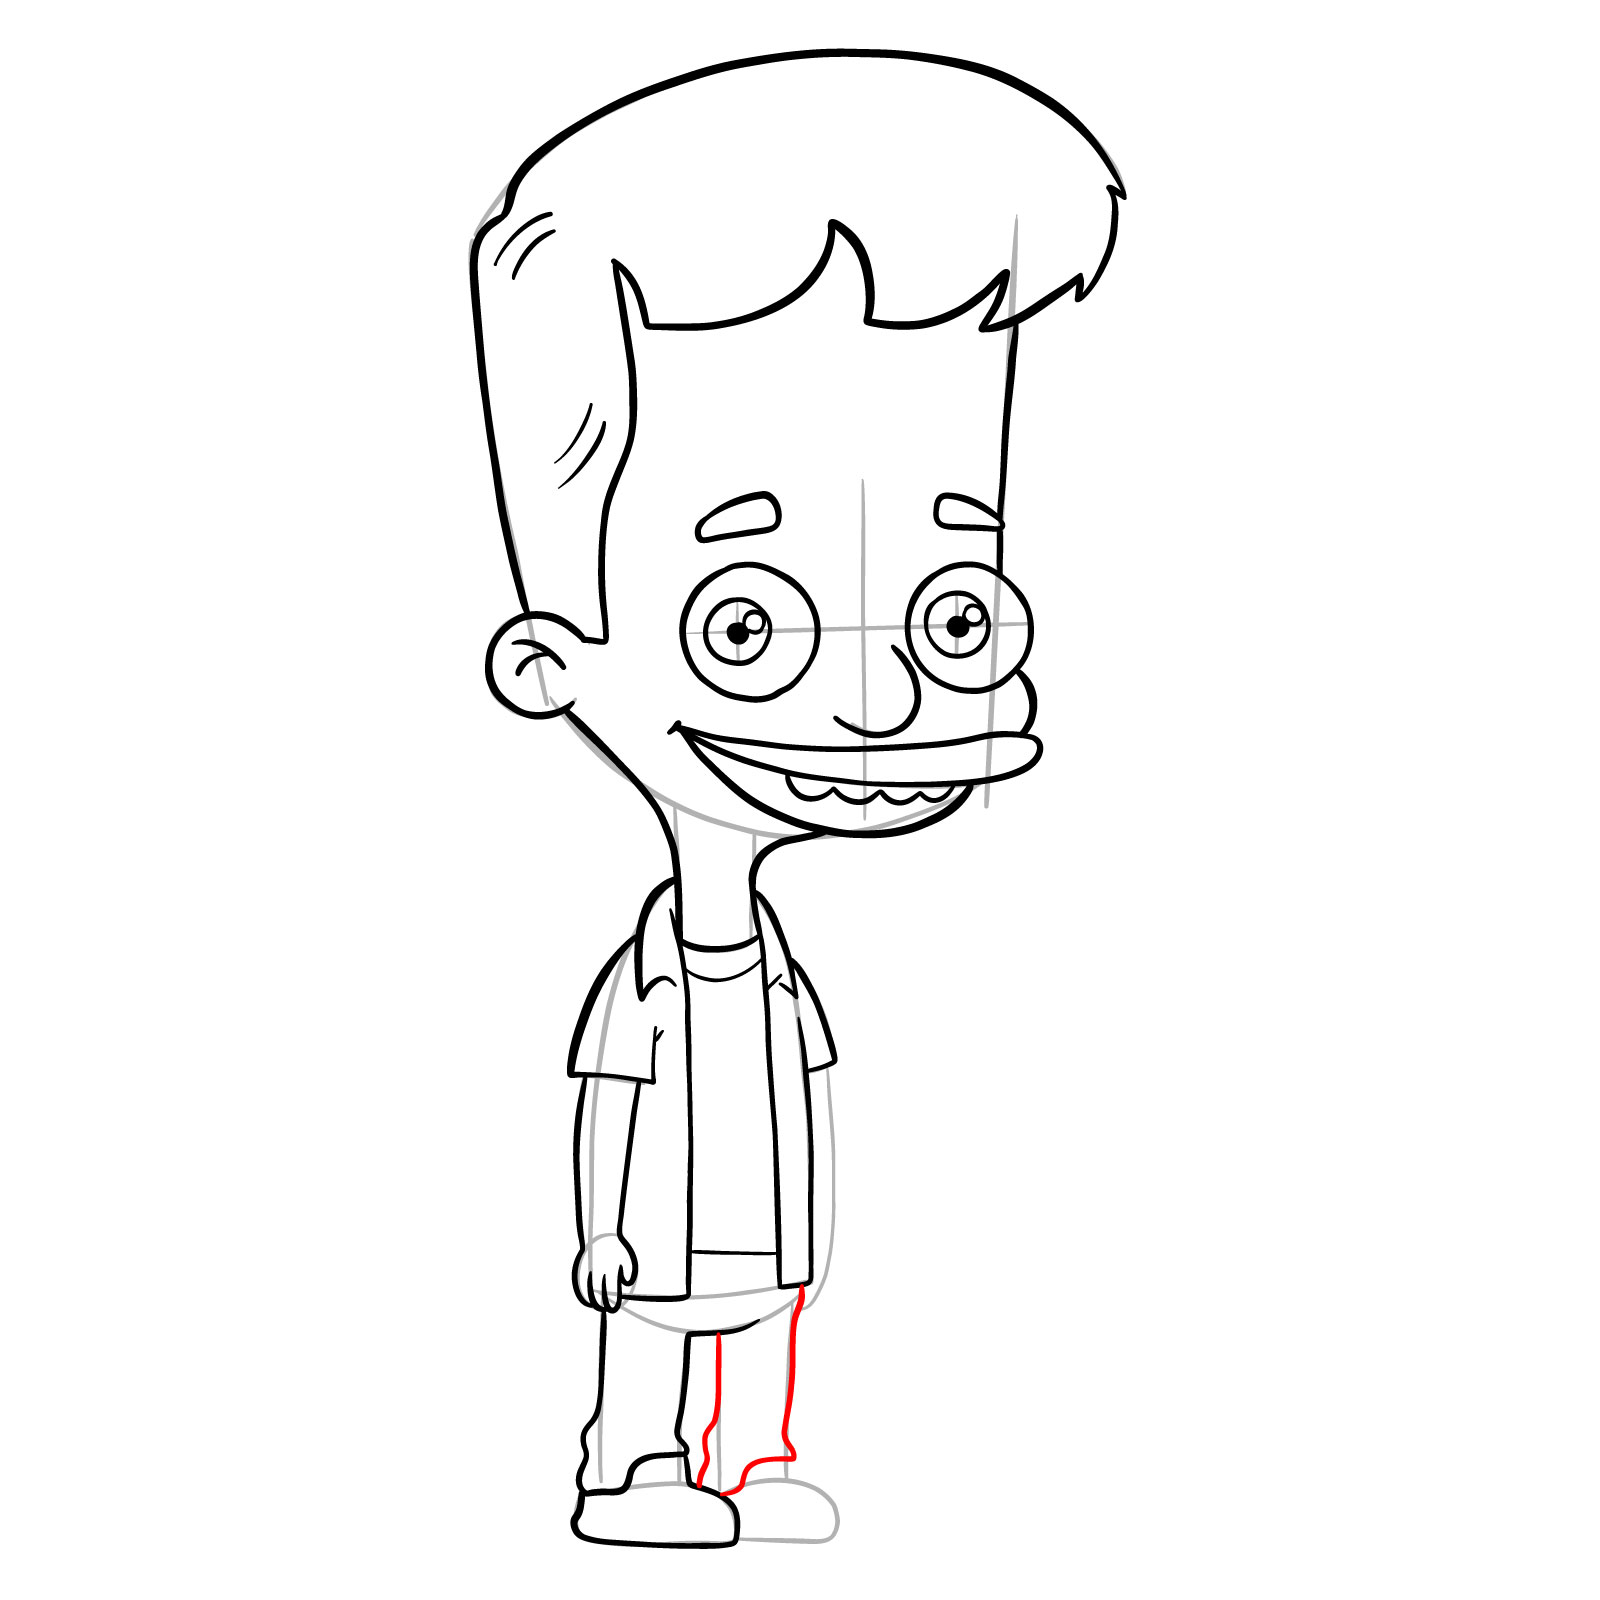 How to draw Nick Birch from Big Mouth - step 22